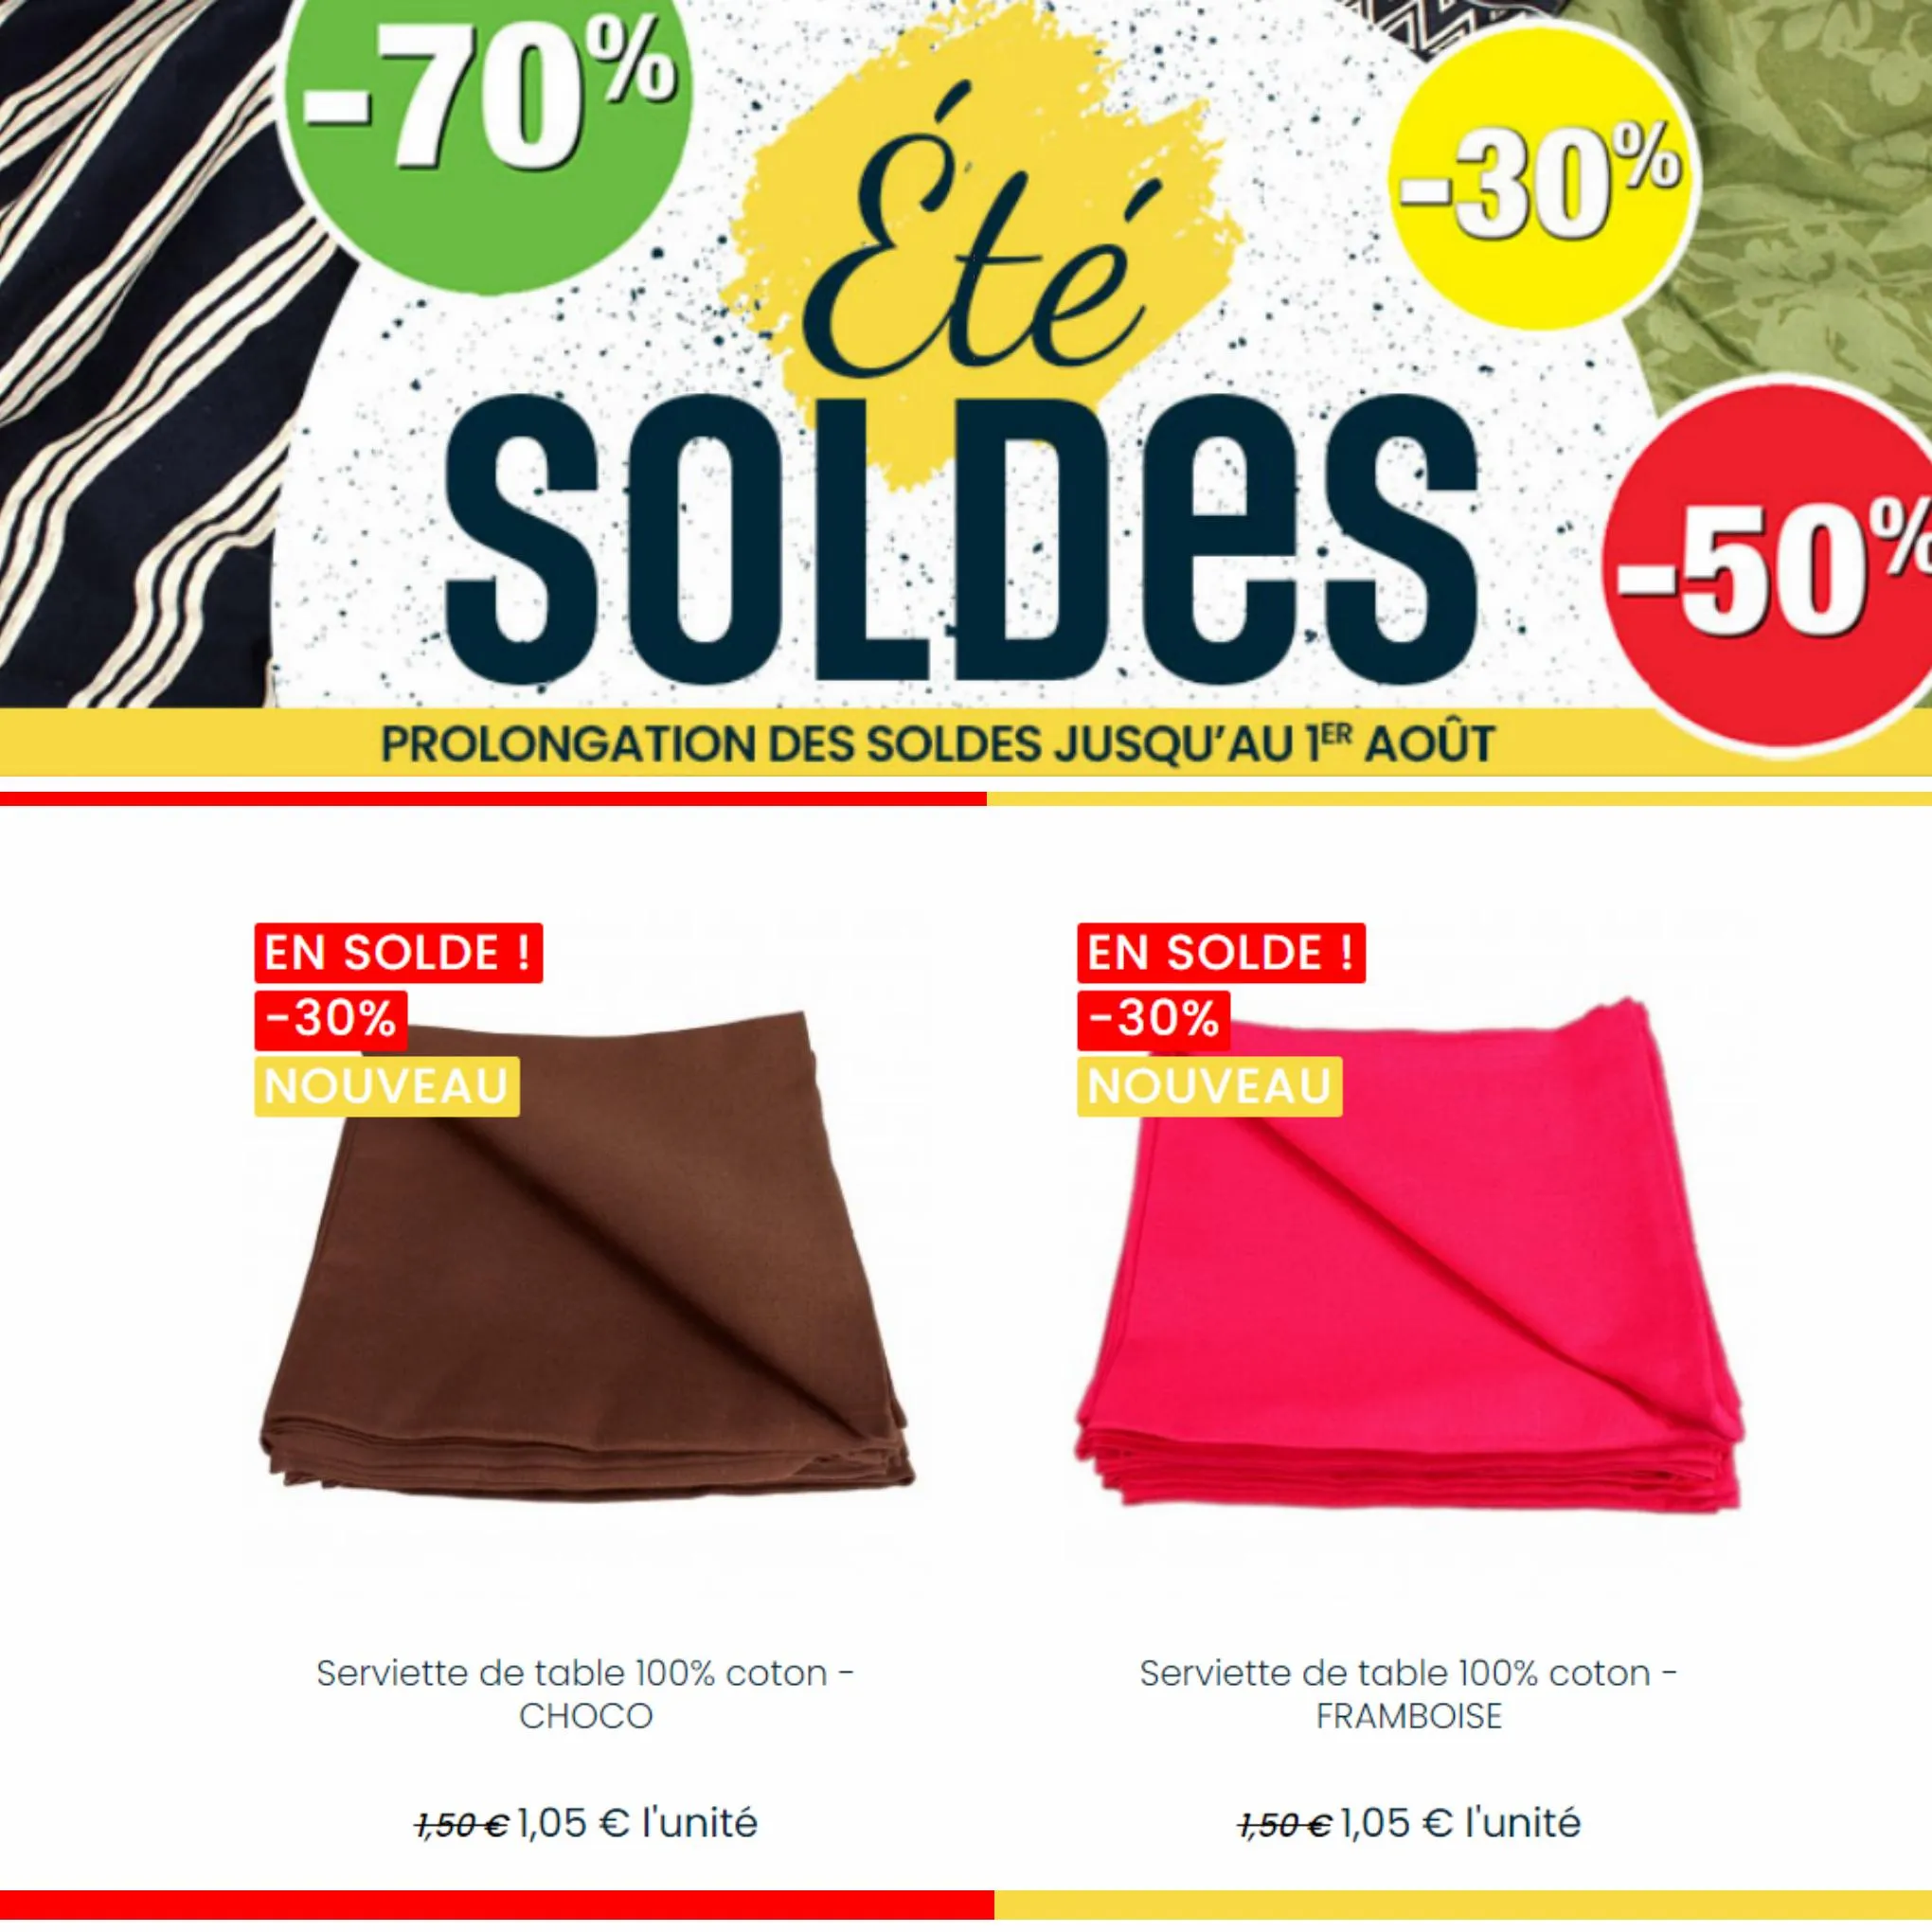 Catalogue Toto Soldes, page 00003